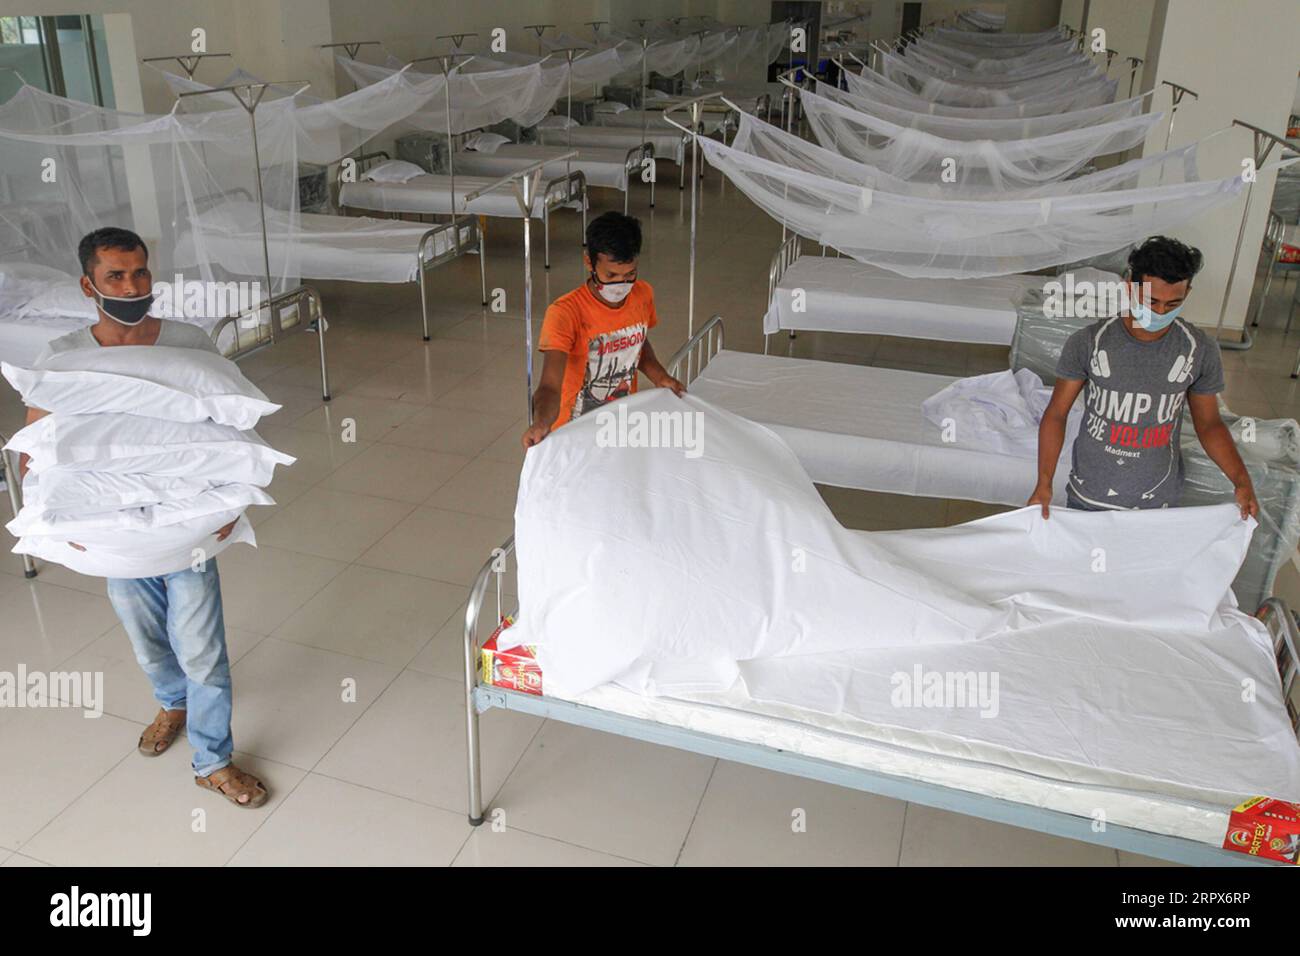 200510 -- DHAKA, May 10, 2020 Xinhua -- Workers prepare beds inside a quarantine facility in Dhaka, Bangladesh on May 10, 2020. The number of new COVID-19 infections in Bangladesh rose by 887 on Sunday, the highest daily increase since March 8. Str/Xinhua BANGLADESH-DHAKA-MAKESHIFT-QUARANTINE-FACILITIES PUBLICATIONxNOTxINxCHN Stock Photo